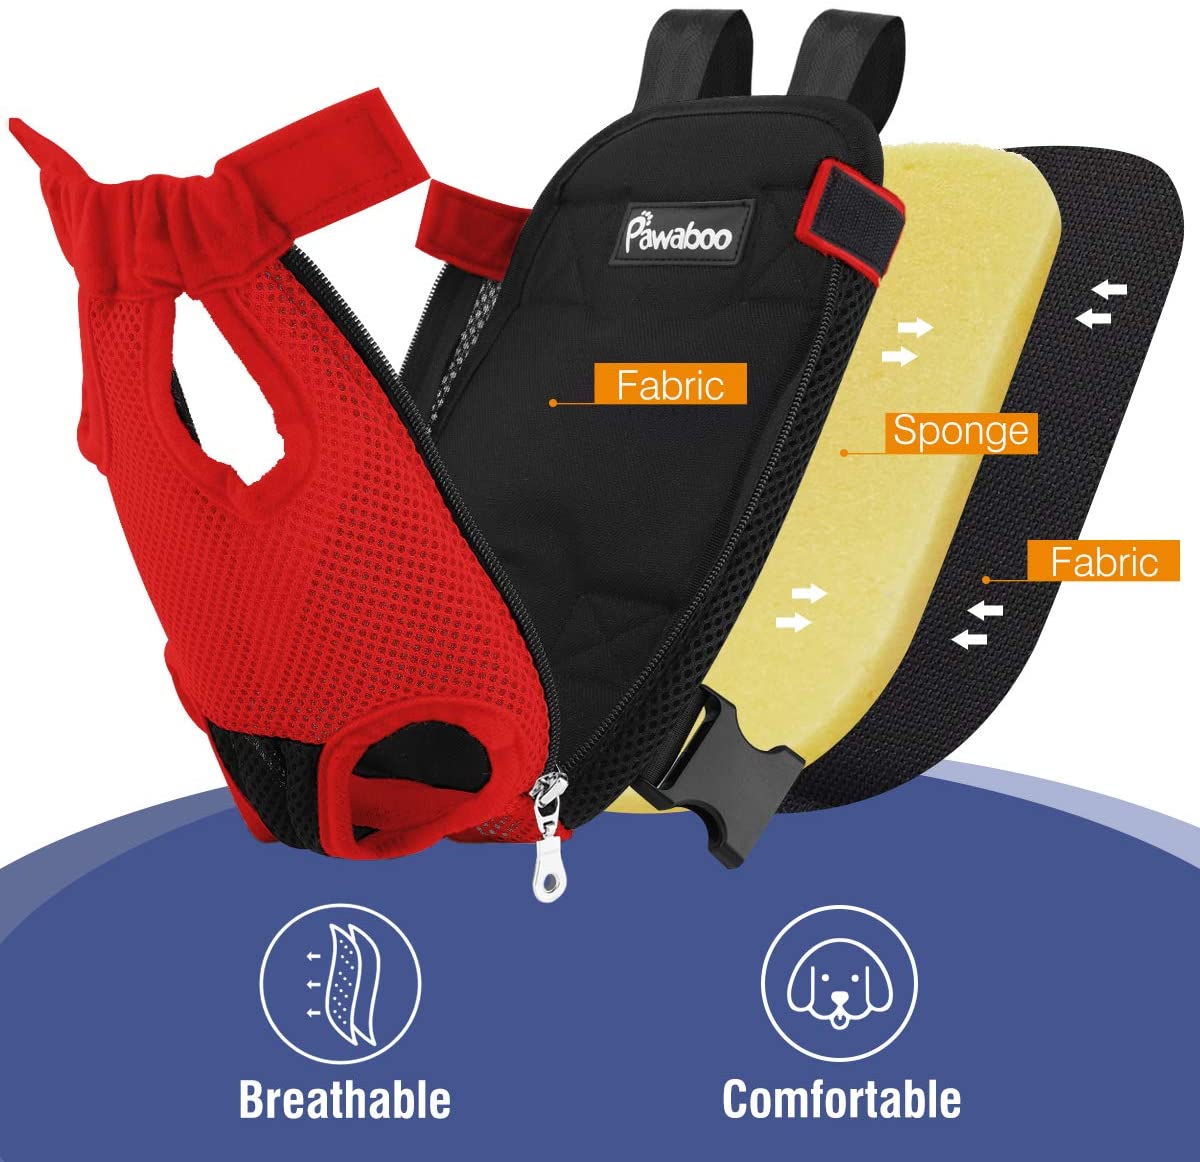 Pawaboo Pet Carrier Backpack - e4cents